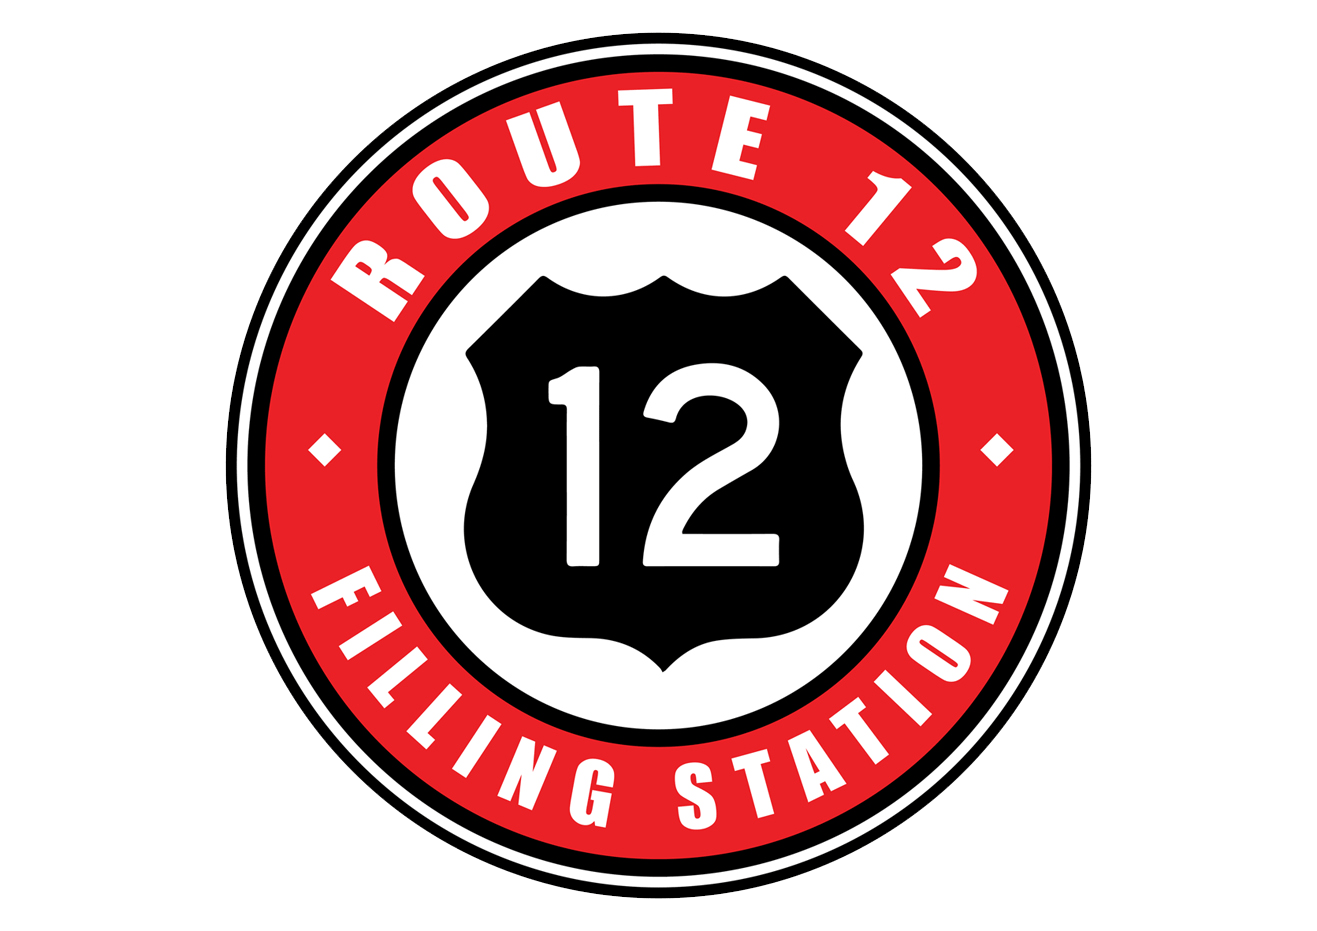 Route 12 Filling Station